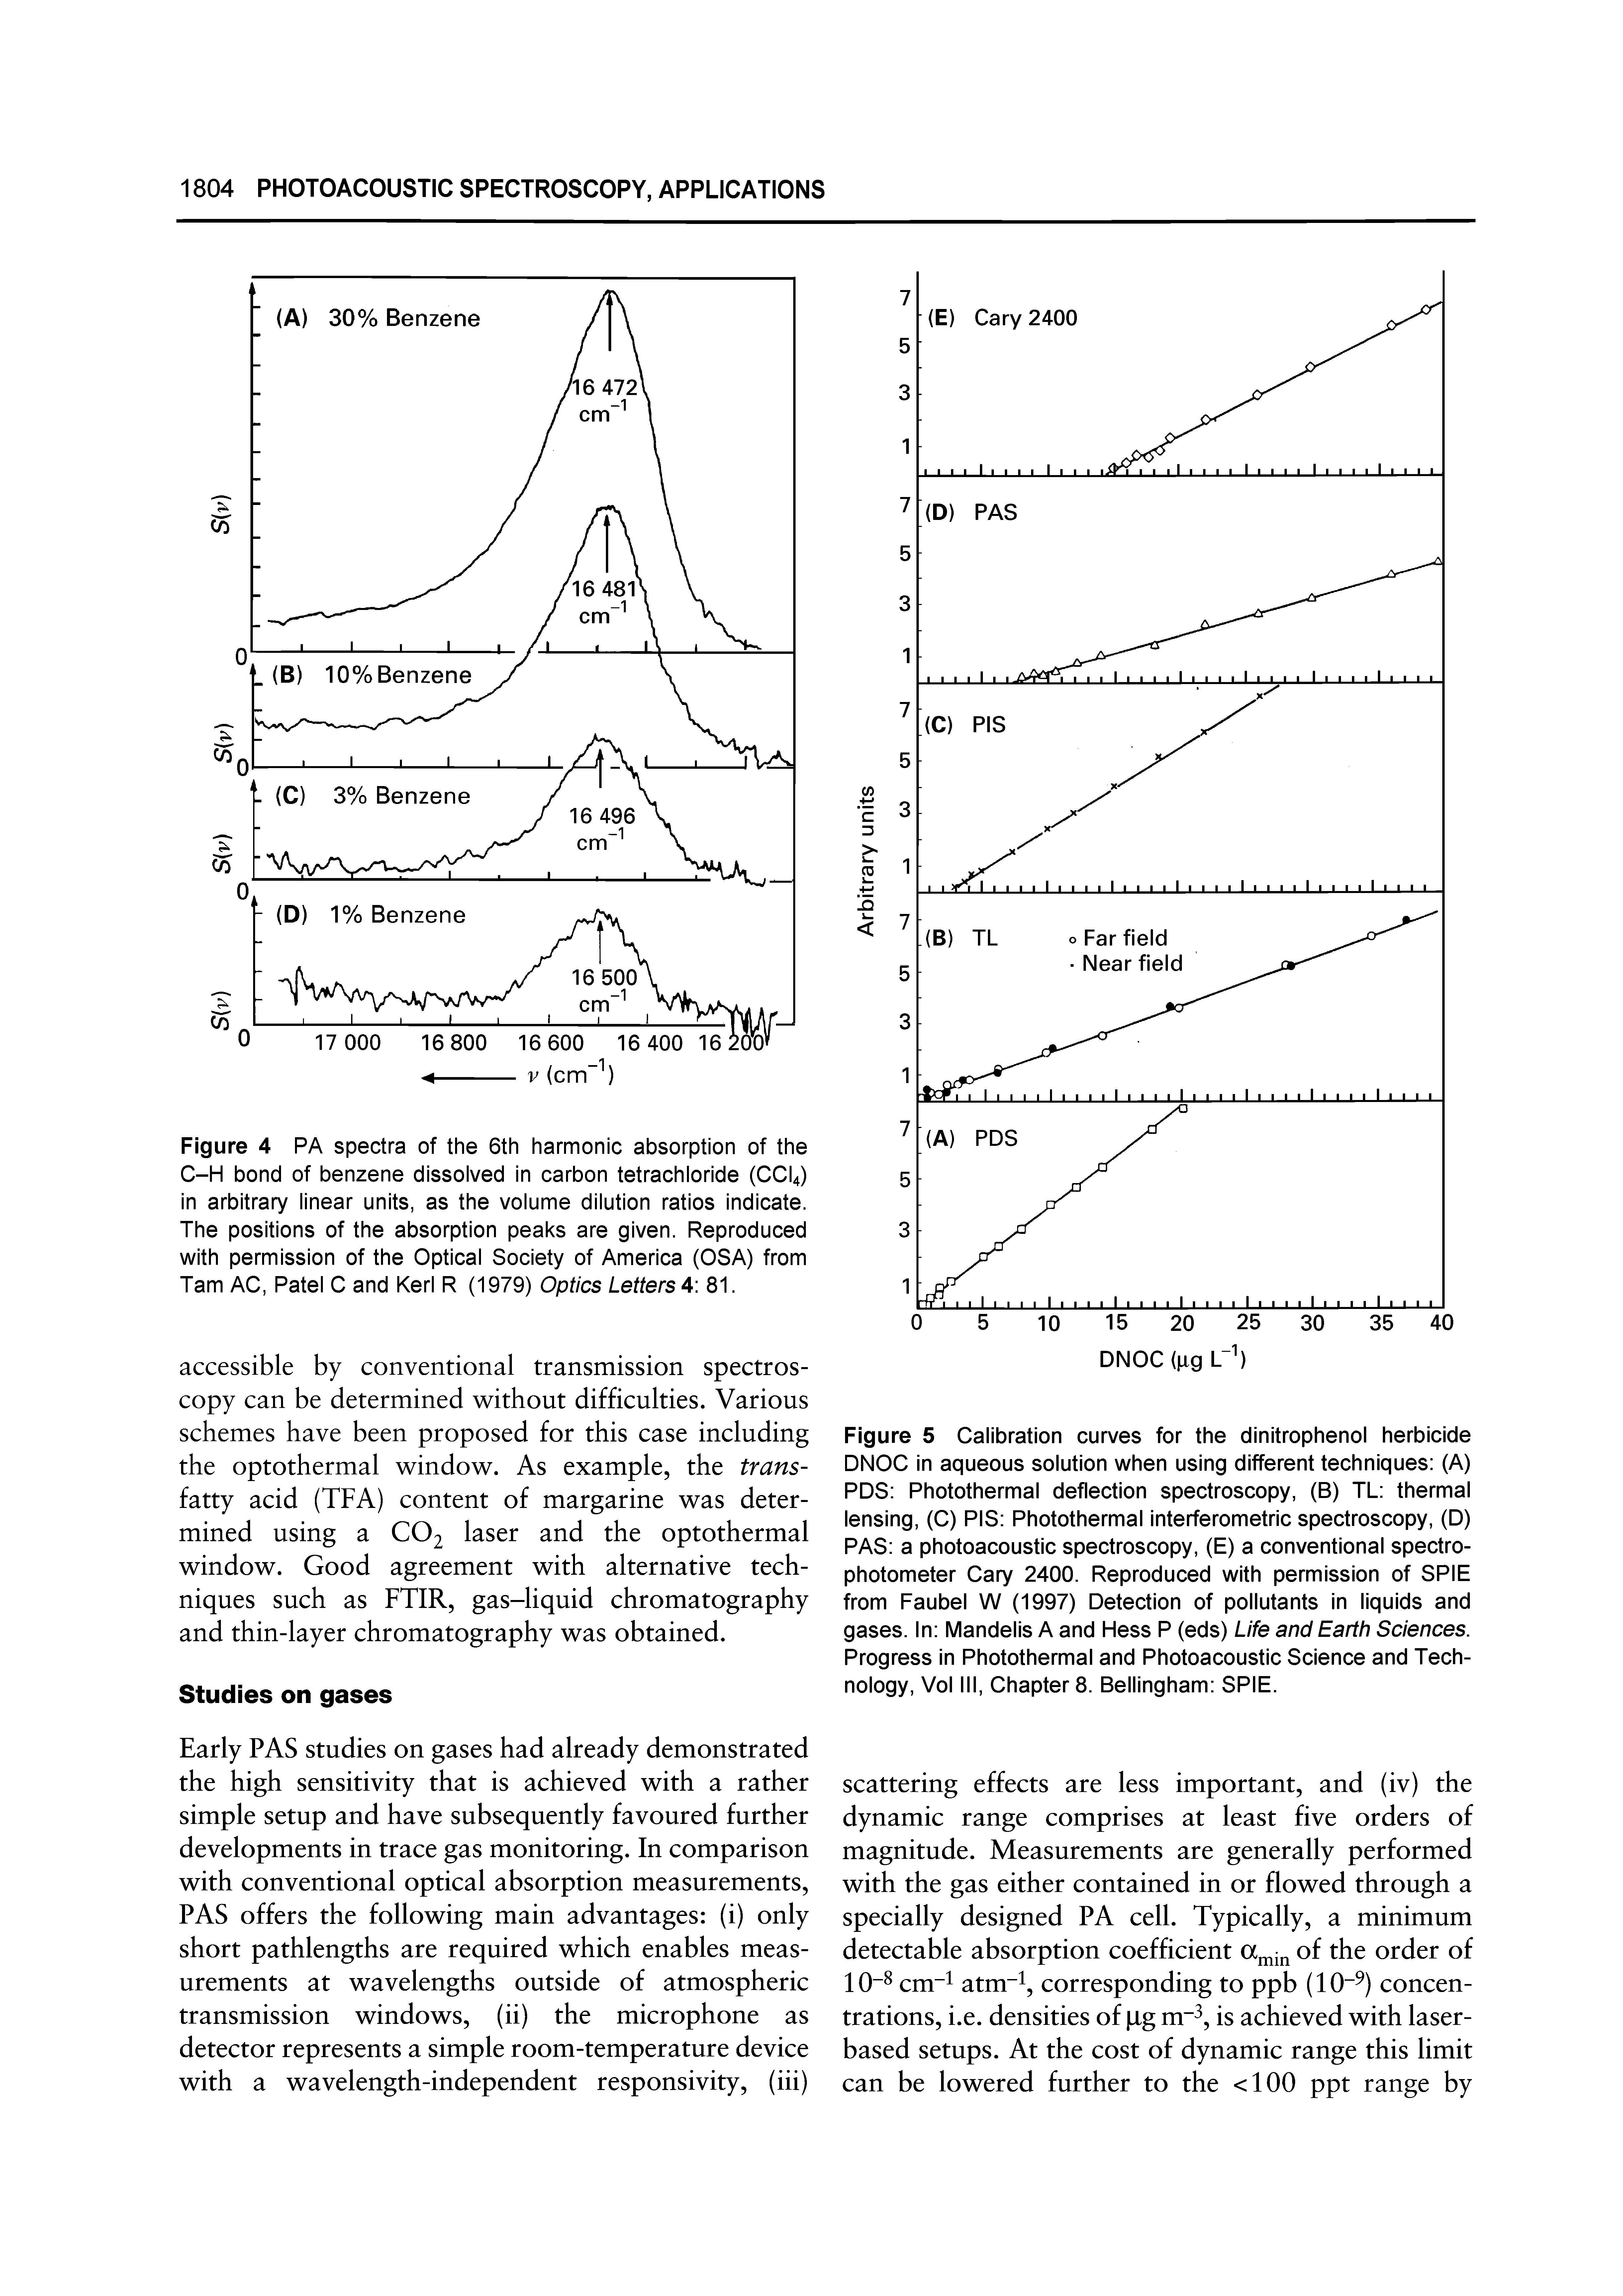 Figure 5 Calibration curves for the dinitrophenol herbicide DNOC in aqueous solution when using different techniques (A) PDS Photothermal deflection spectroscopy, (B) TL thermal leasing, (C) PIS Photothermal Interferometric spectroscopy, (D) PAS a photoacoustic spectroscopy, (E) a conventional spectrophotometer Cary 2400. Reproduced with permission of SPIE from Faubel W (1997) Detection of pollutants in liquids and gases. In Mandelis A and Hess P (eds) Life and Earth Sciences. Progress in Photothermal and Photoacoustic Science and Technology, Vol III, Chapter 8. Bellingham SPIE.